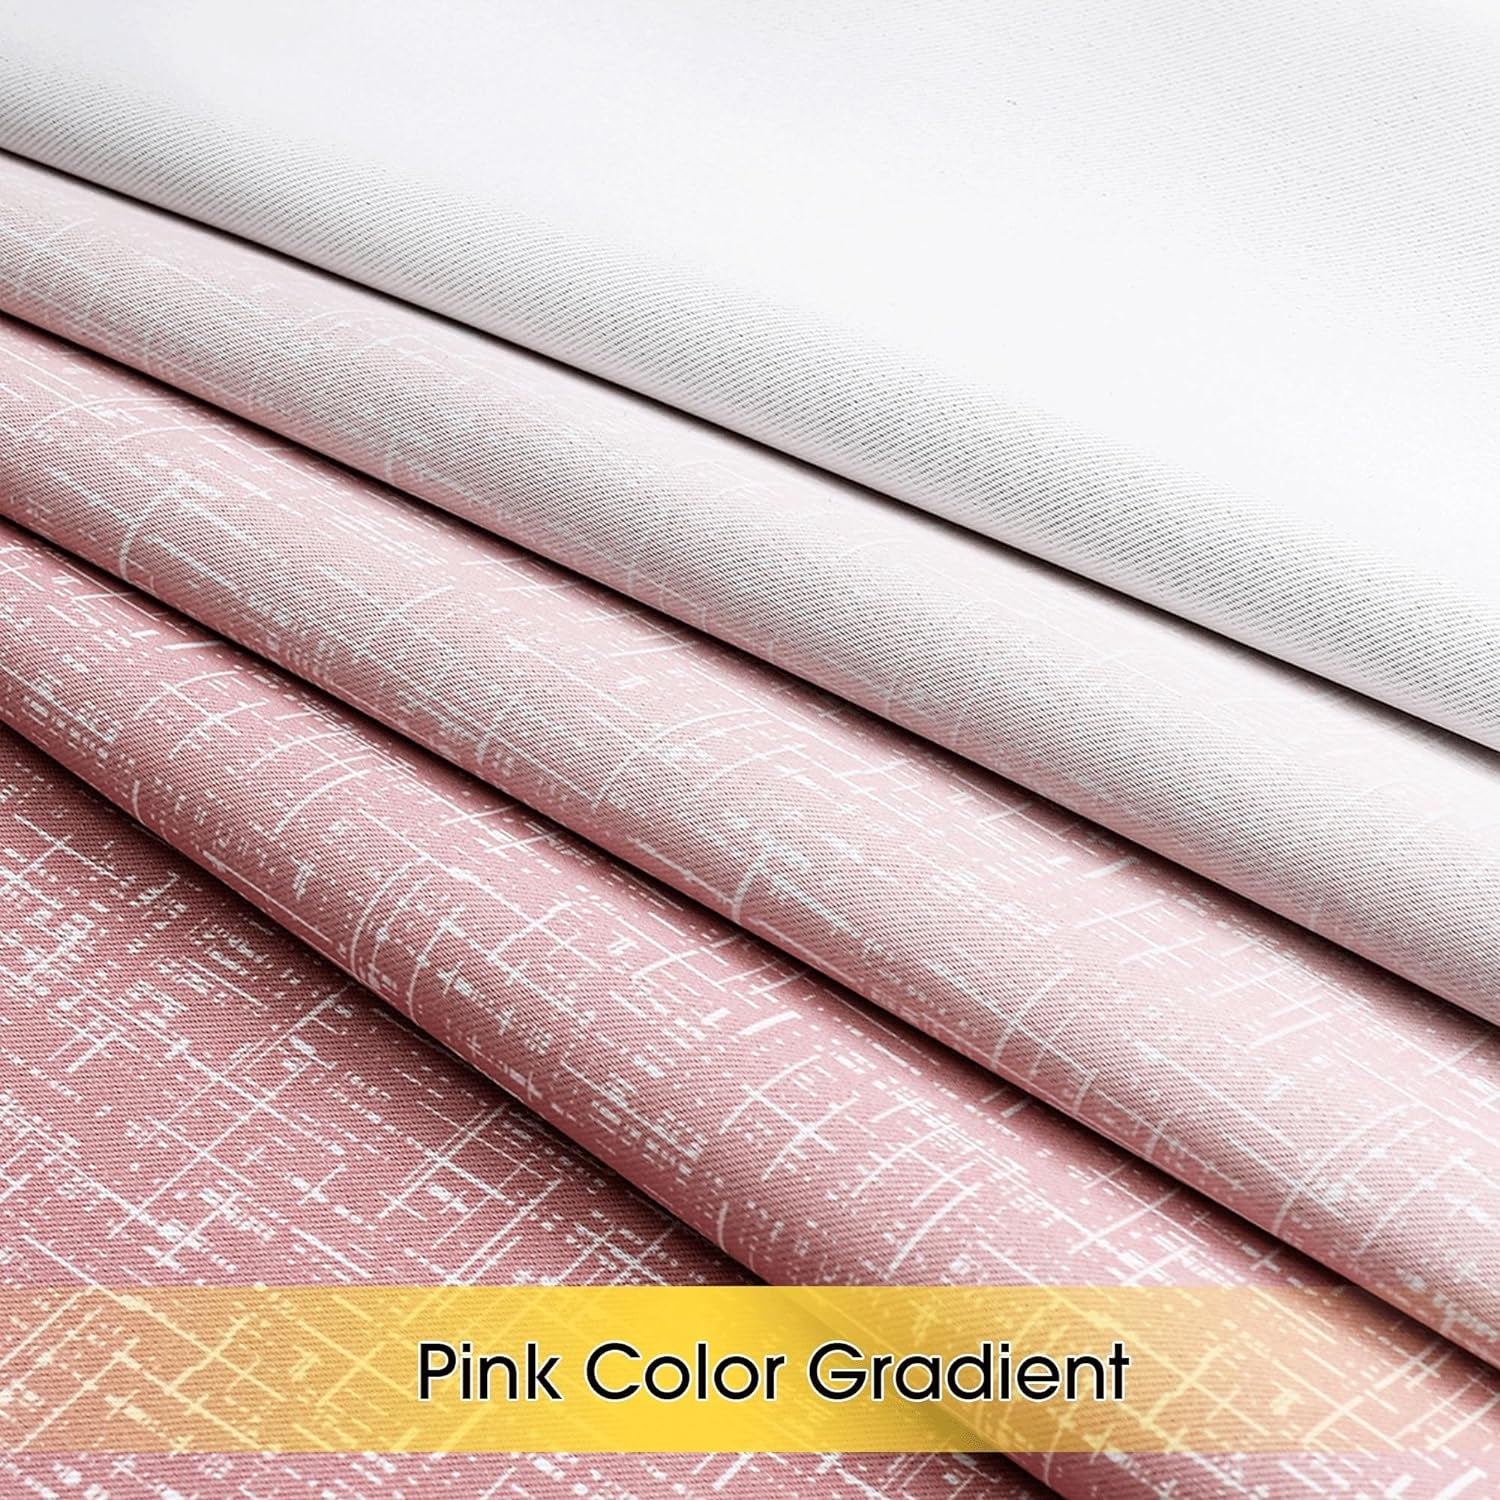 Geomoroccan Ombre 100% Blackout Curtains 84 Inches Long, Pink and White 2 Tone Reversible Window Treatments for Bedroom Living Room, Linen Gradient Print Rod Pocket Drapes 52" W 2 Panel Sets  Geomoroccan   